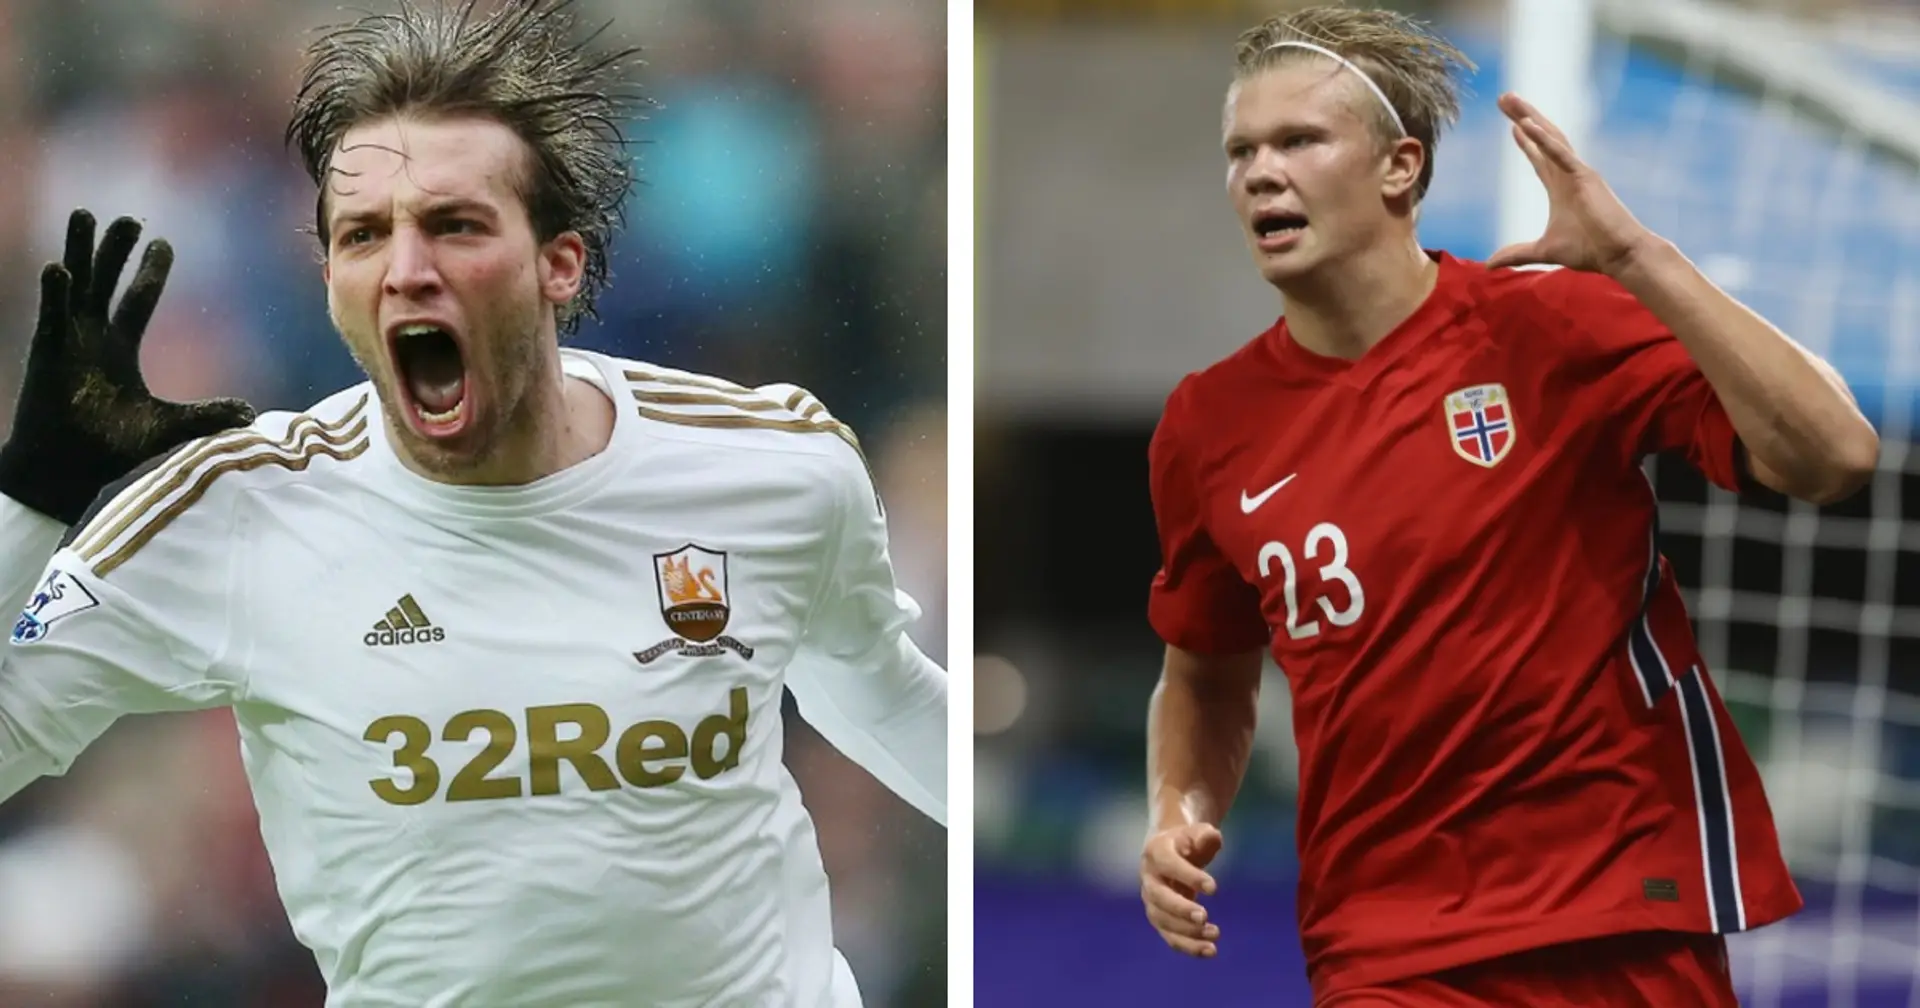 'I don't think he's going to continue at Dortmund': Haaland's childhood idol Michu after meeting Erling